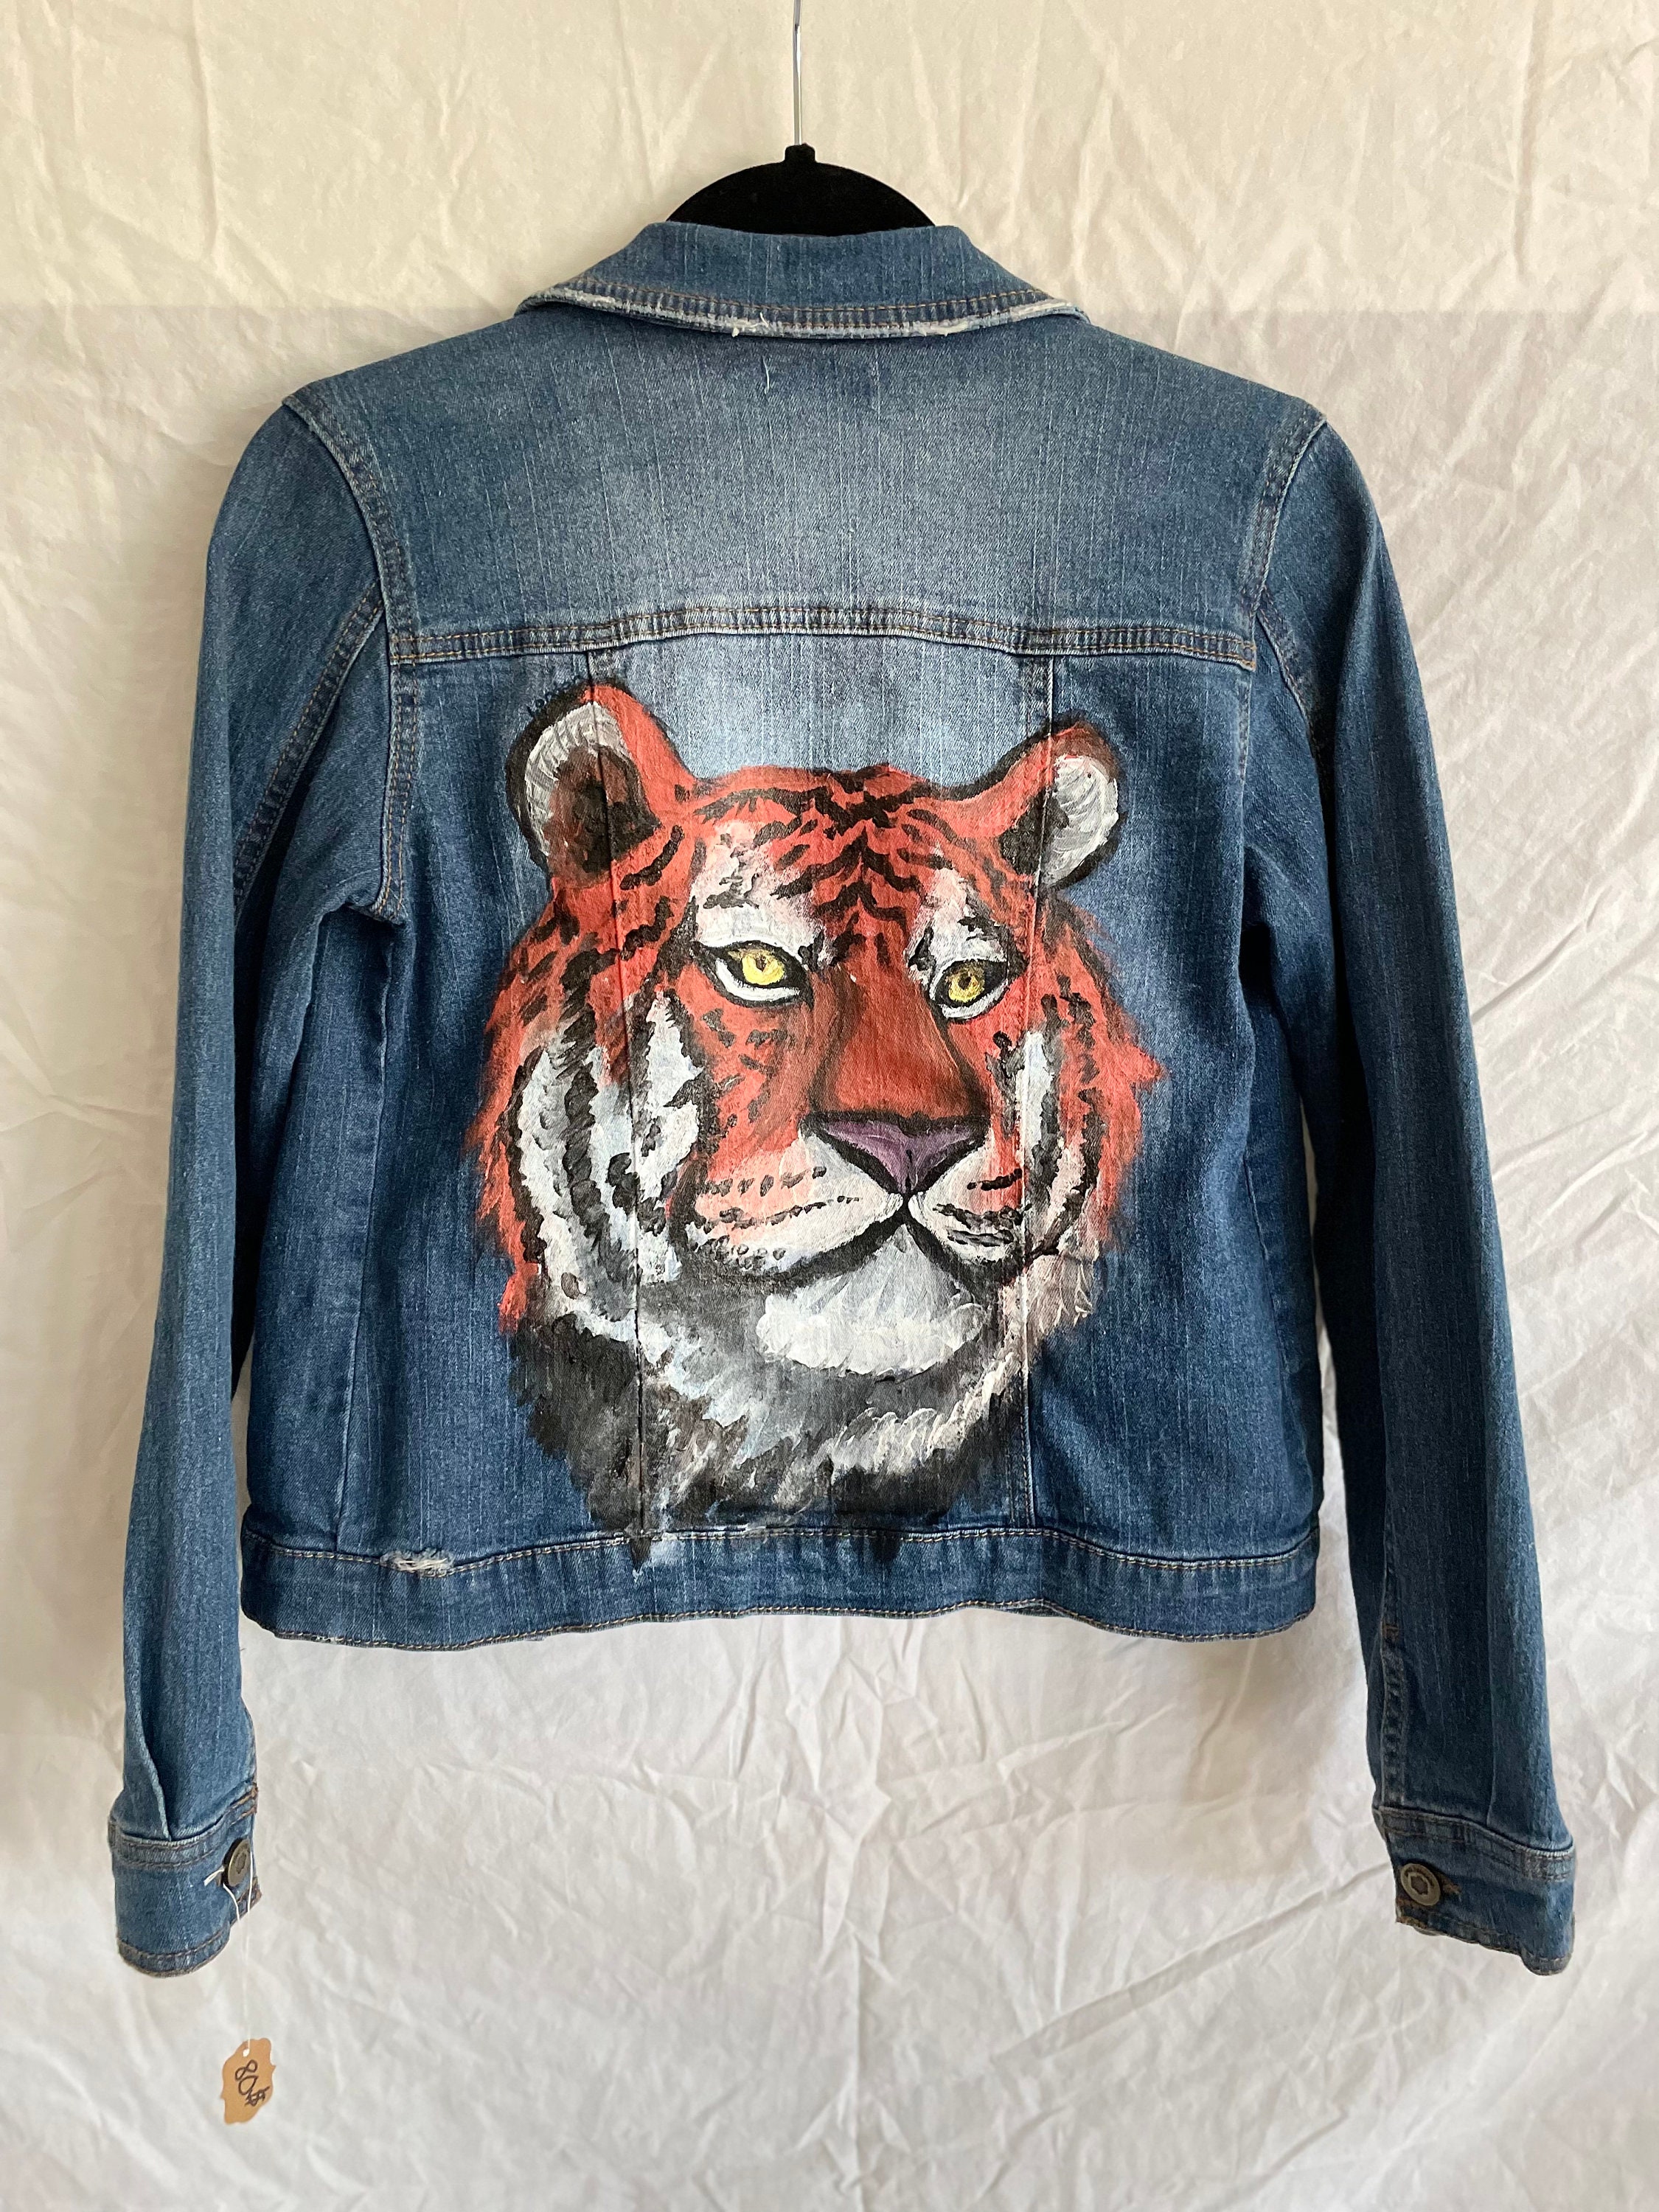 Large Iron on Patches for Jackets, Large Blue Tiger Patch, Iron-on